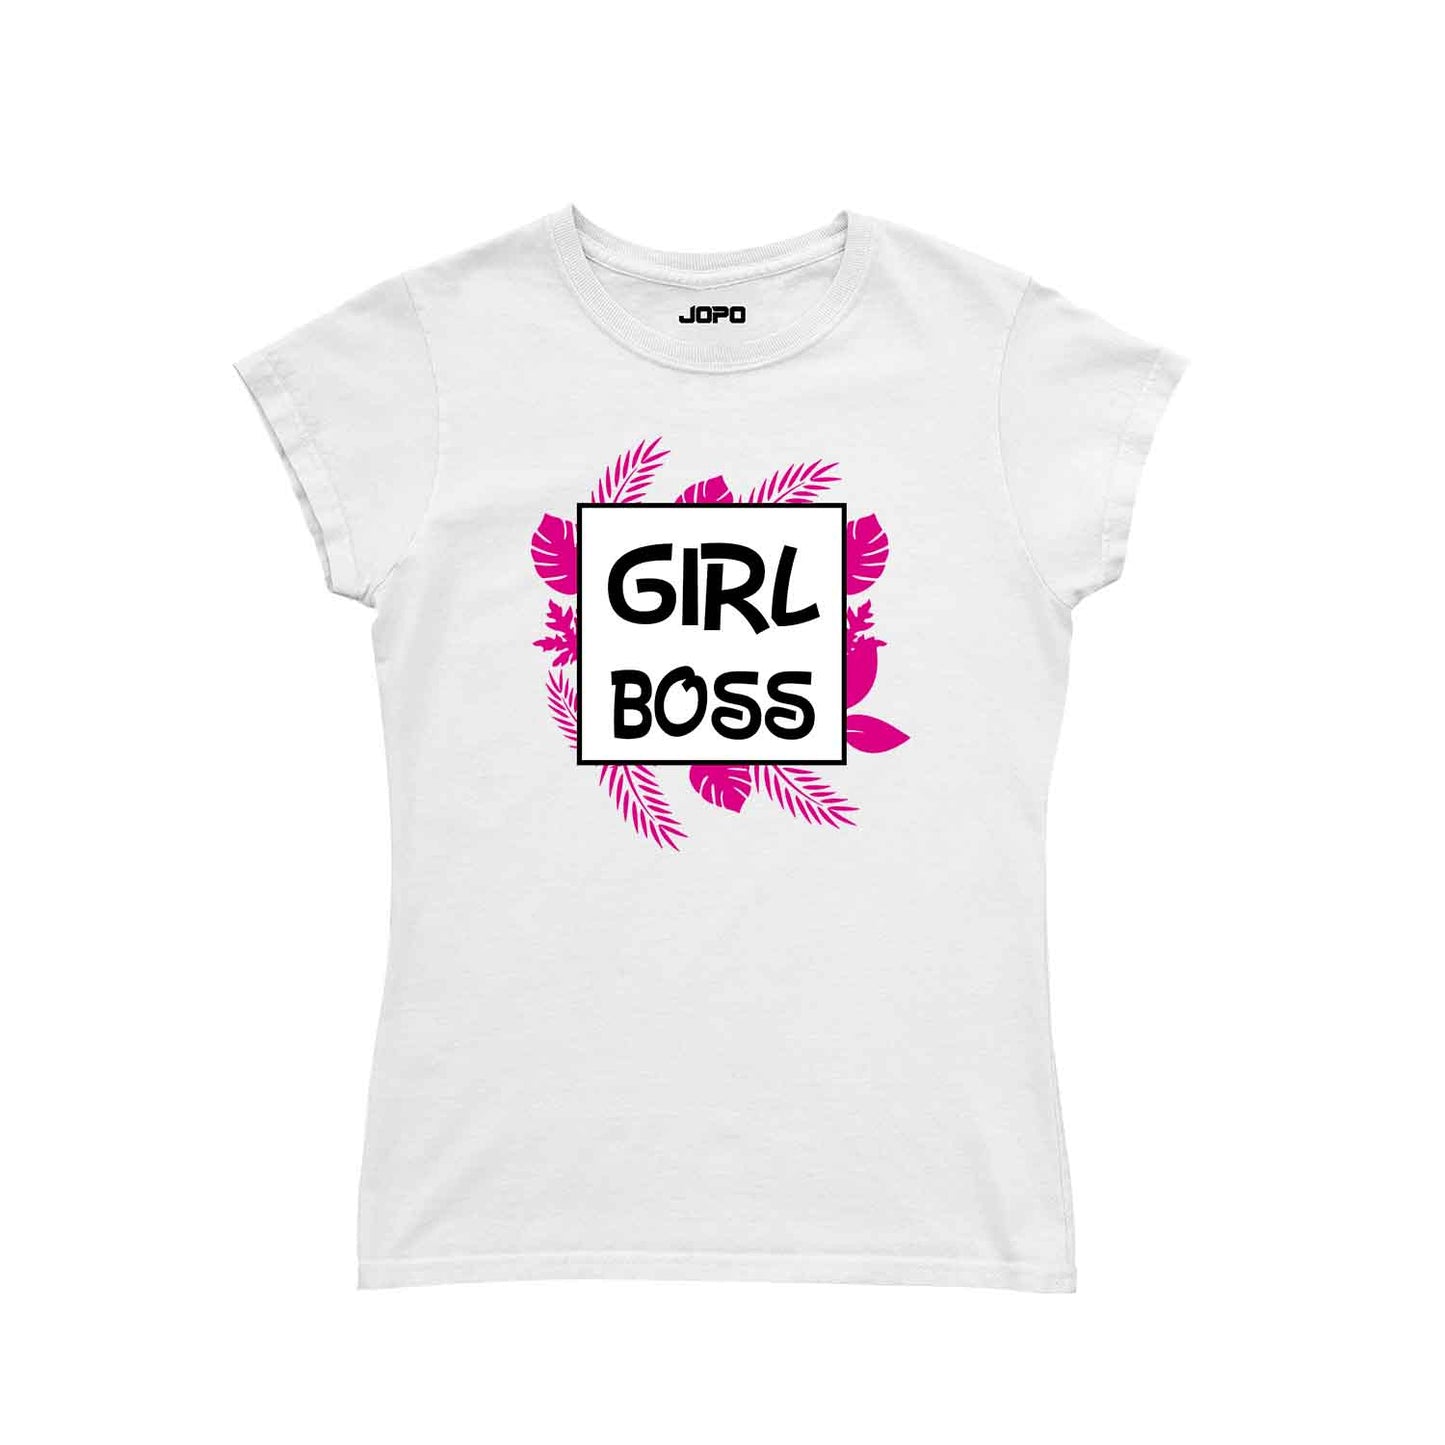 MultiColor Tees 5pc Girls Combo